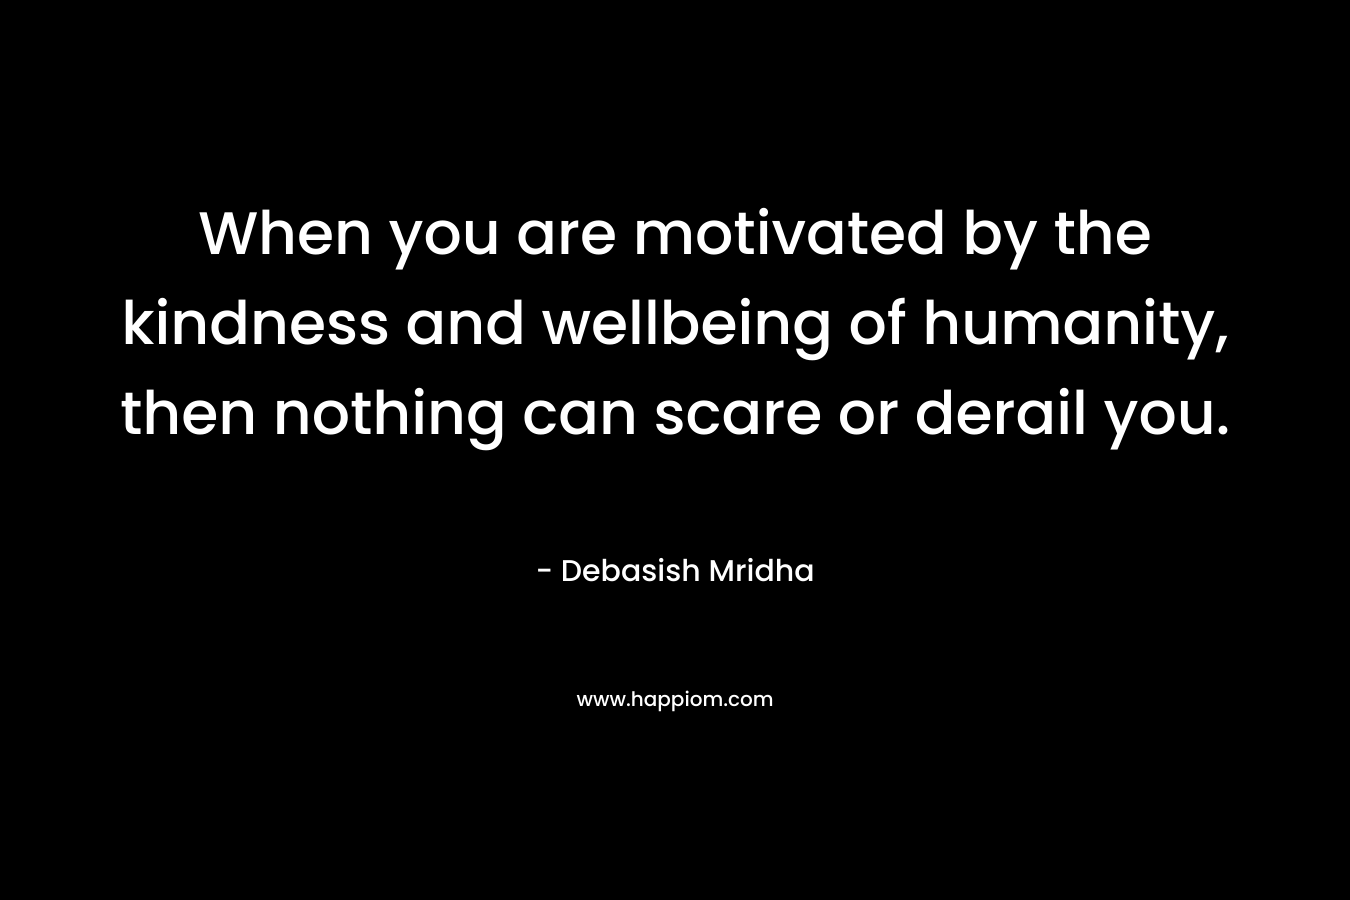 When you are motivated by the kindness and wellbeing of humanity, then nothing can scare or derail you.